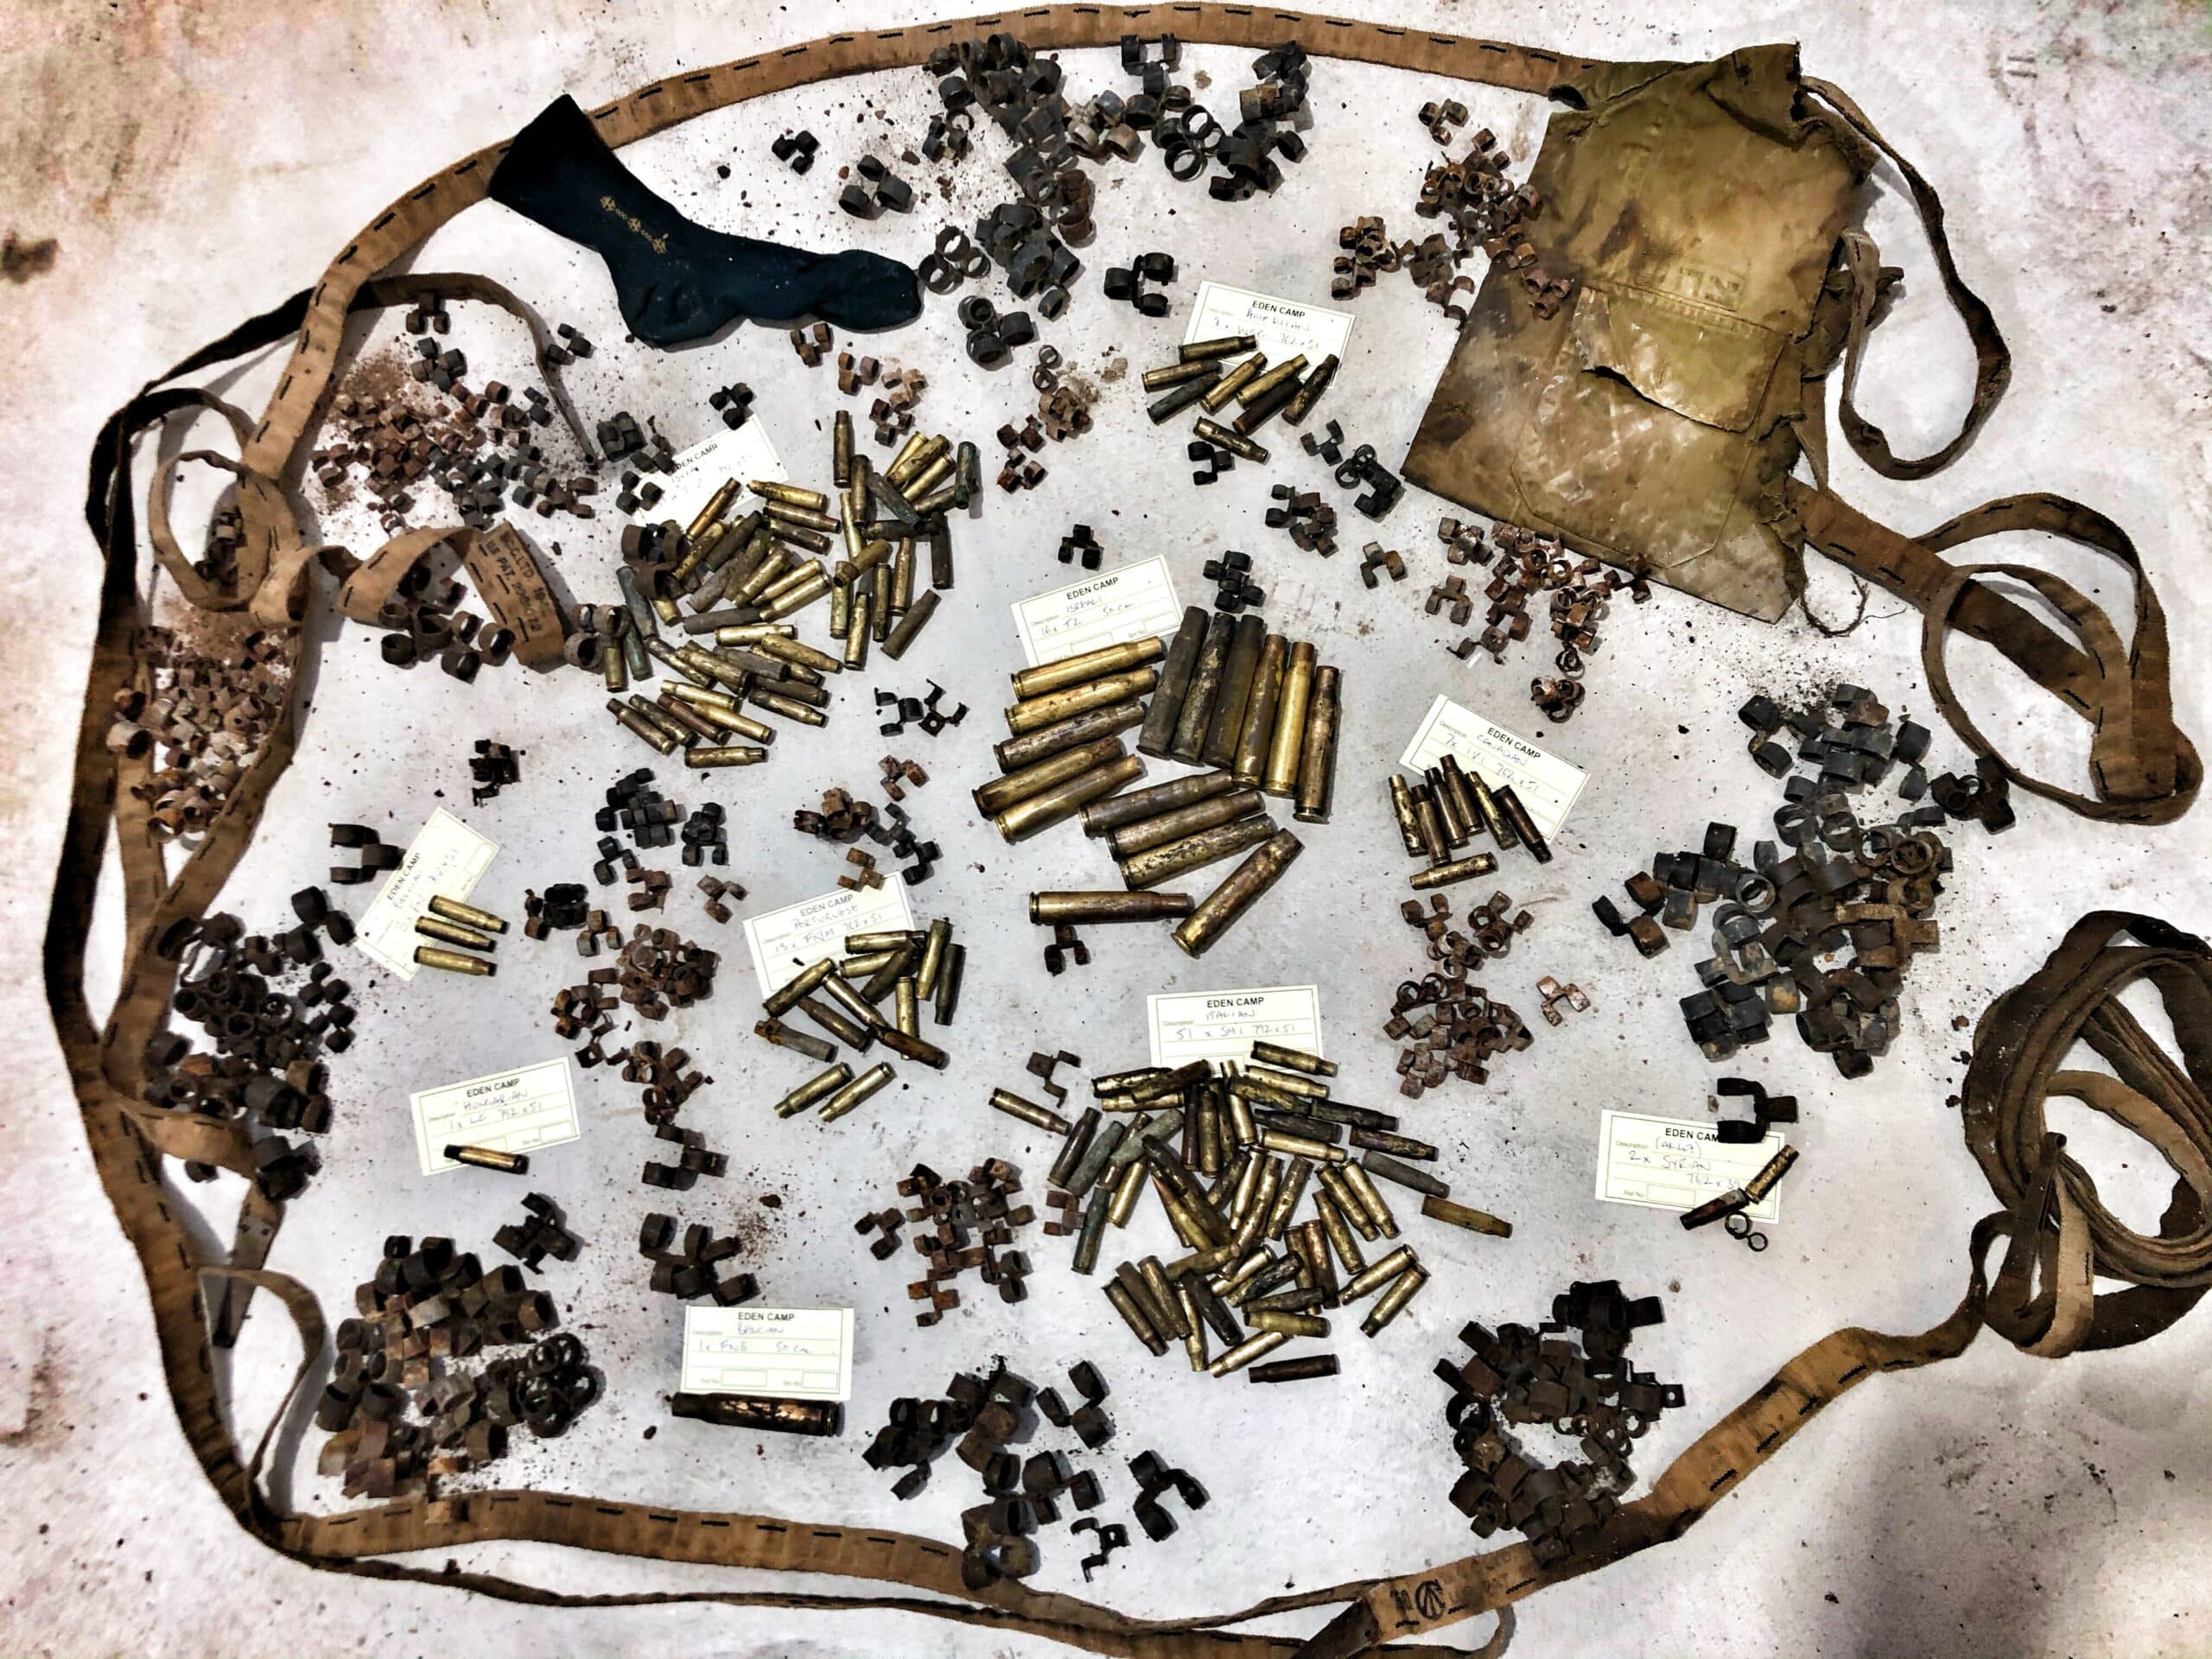 M50 artifacts removed during restoration, including .50 calibre bullets and links.